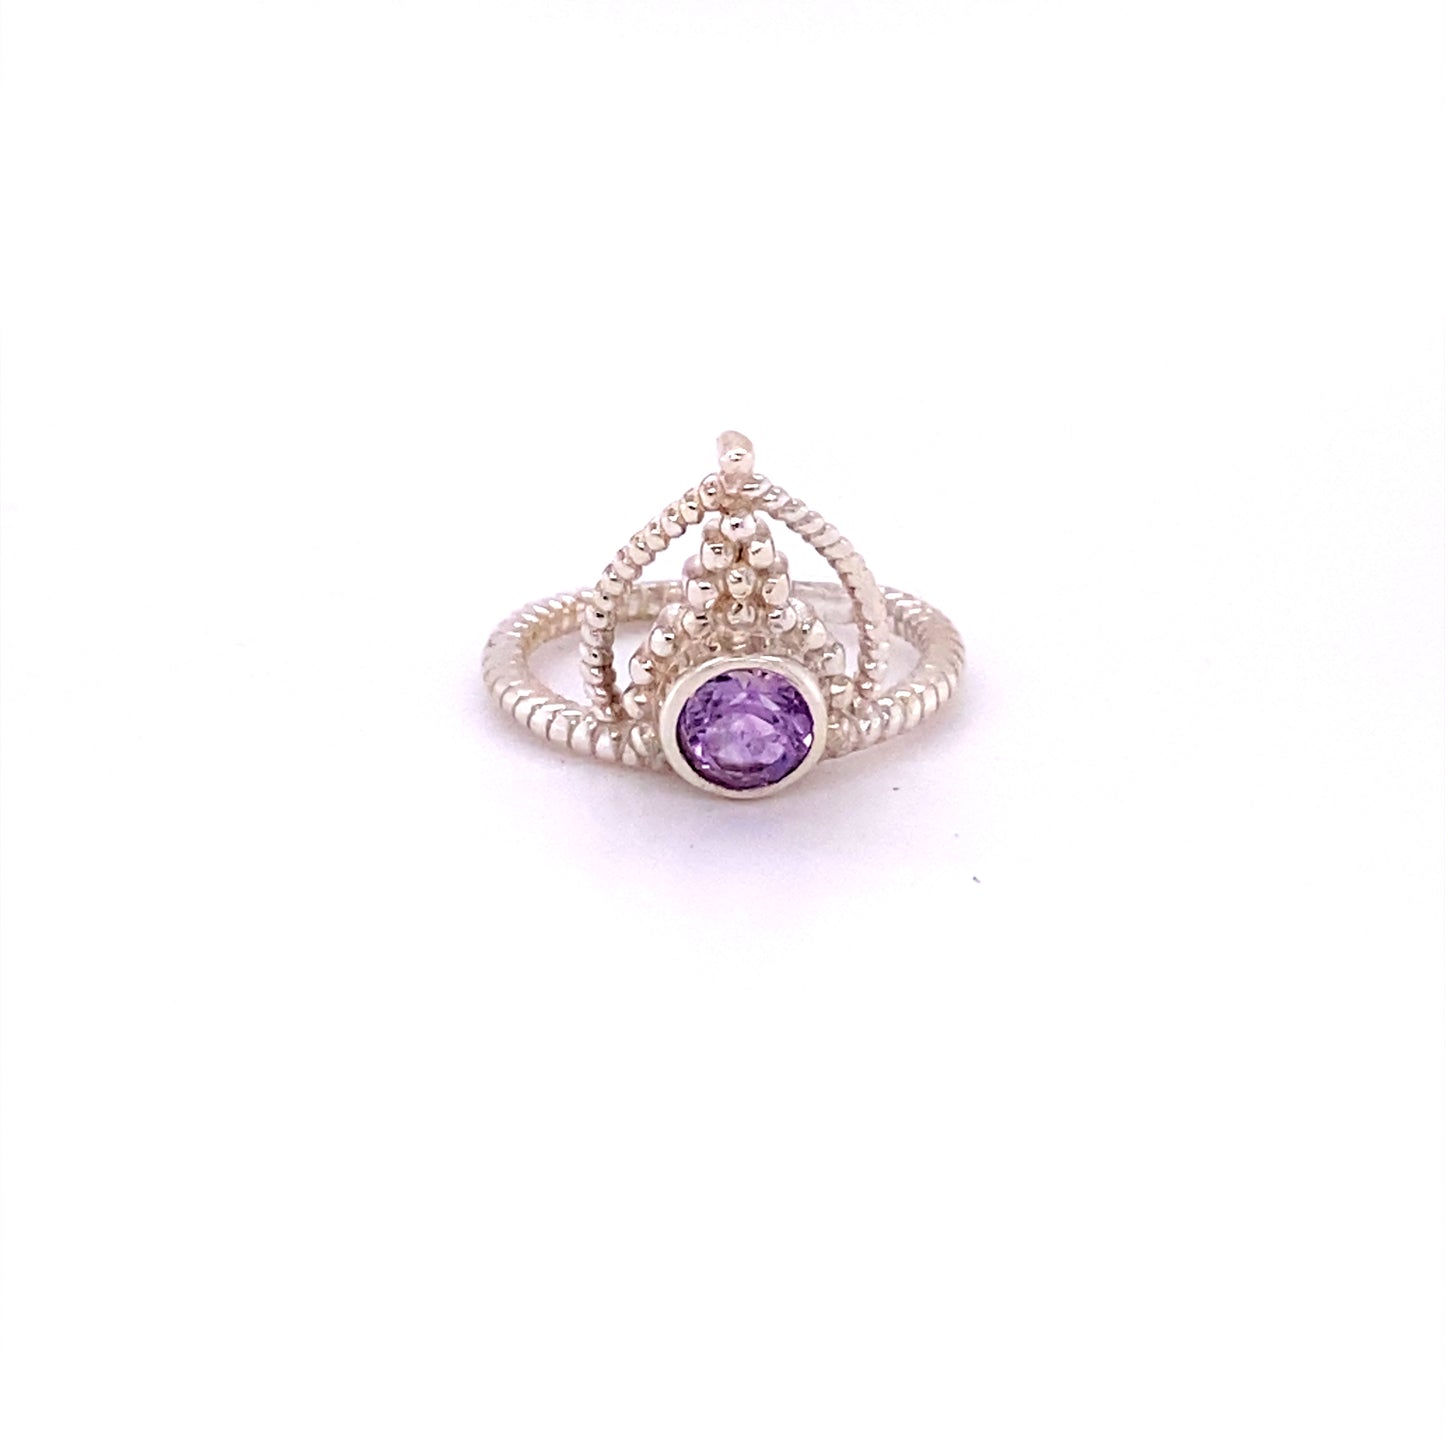 A Simple Tiara Ring with Natural Gemstones with a cabochon purple stone.